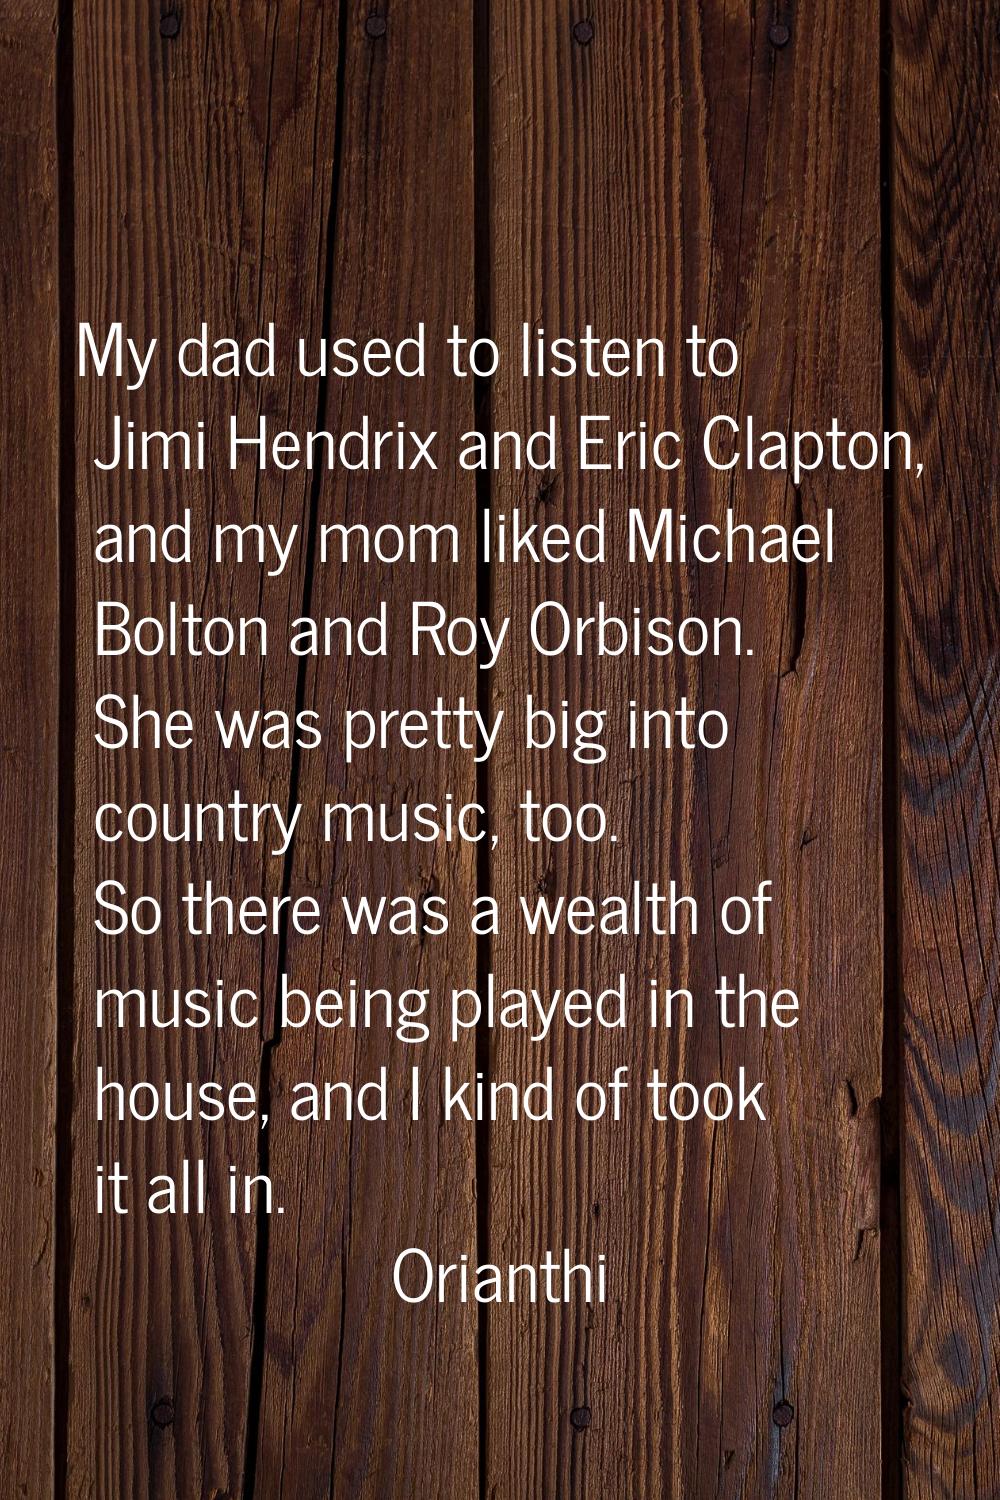 My dad used to listen to Jimi Hendrix and Eric Clapton, and my mom liked Michael Bolton and Roy Orb